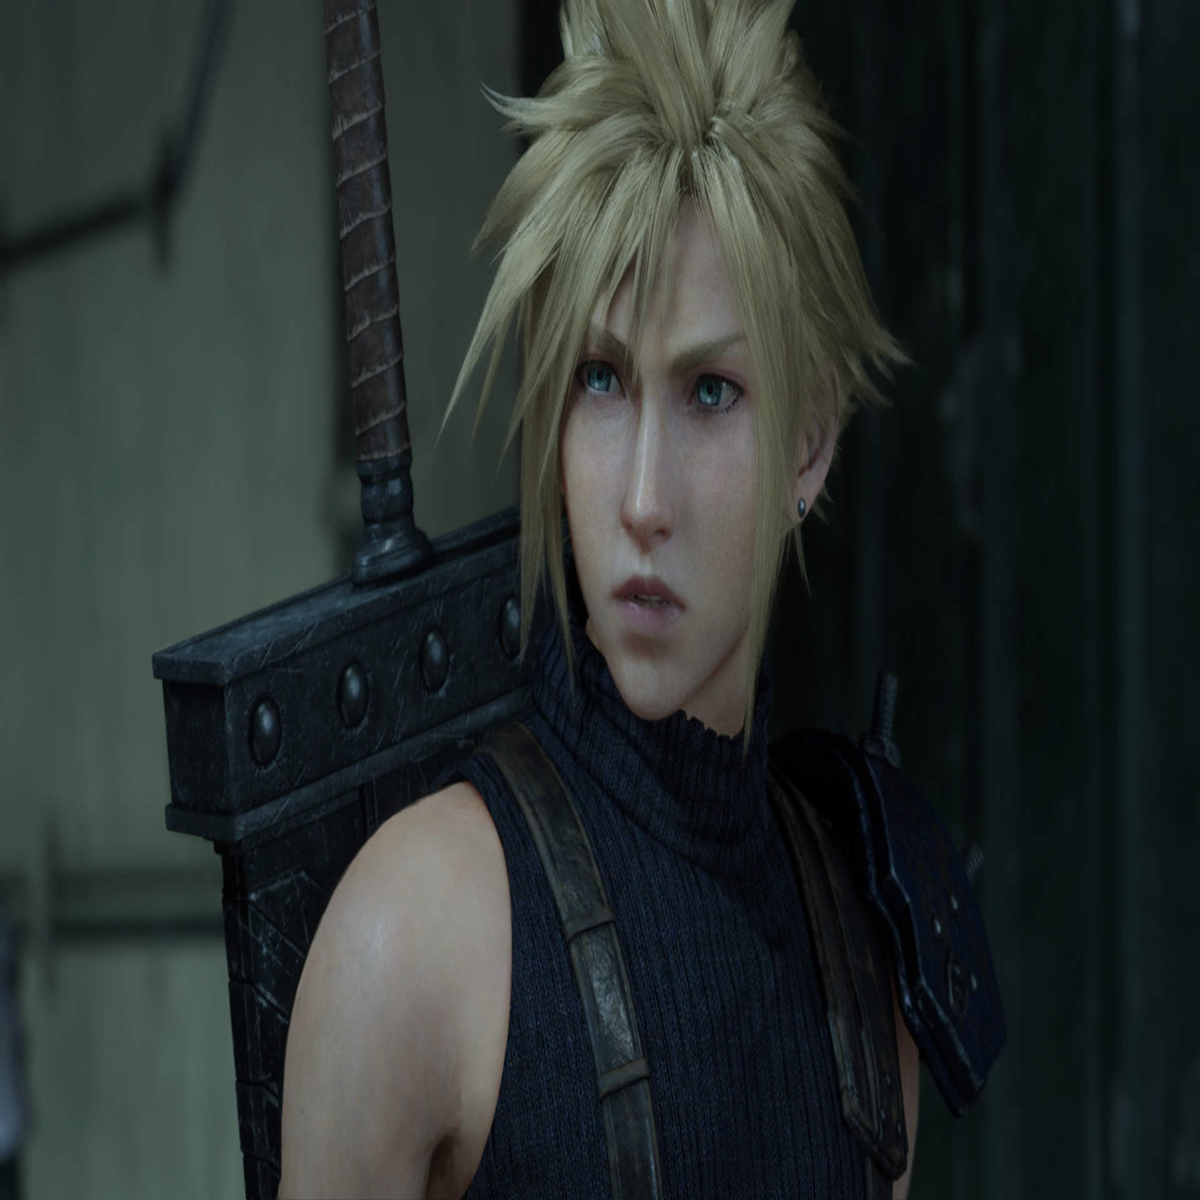 Final Fantasy VII Remake (PS4) Review - Lonely Outlet